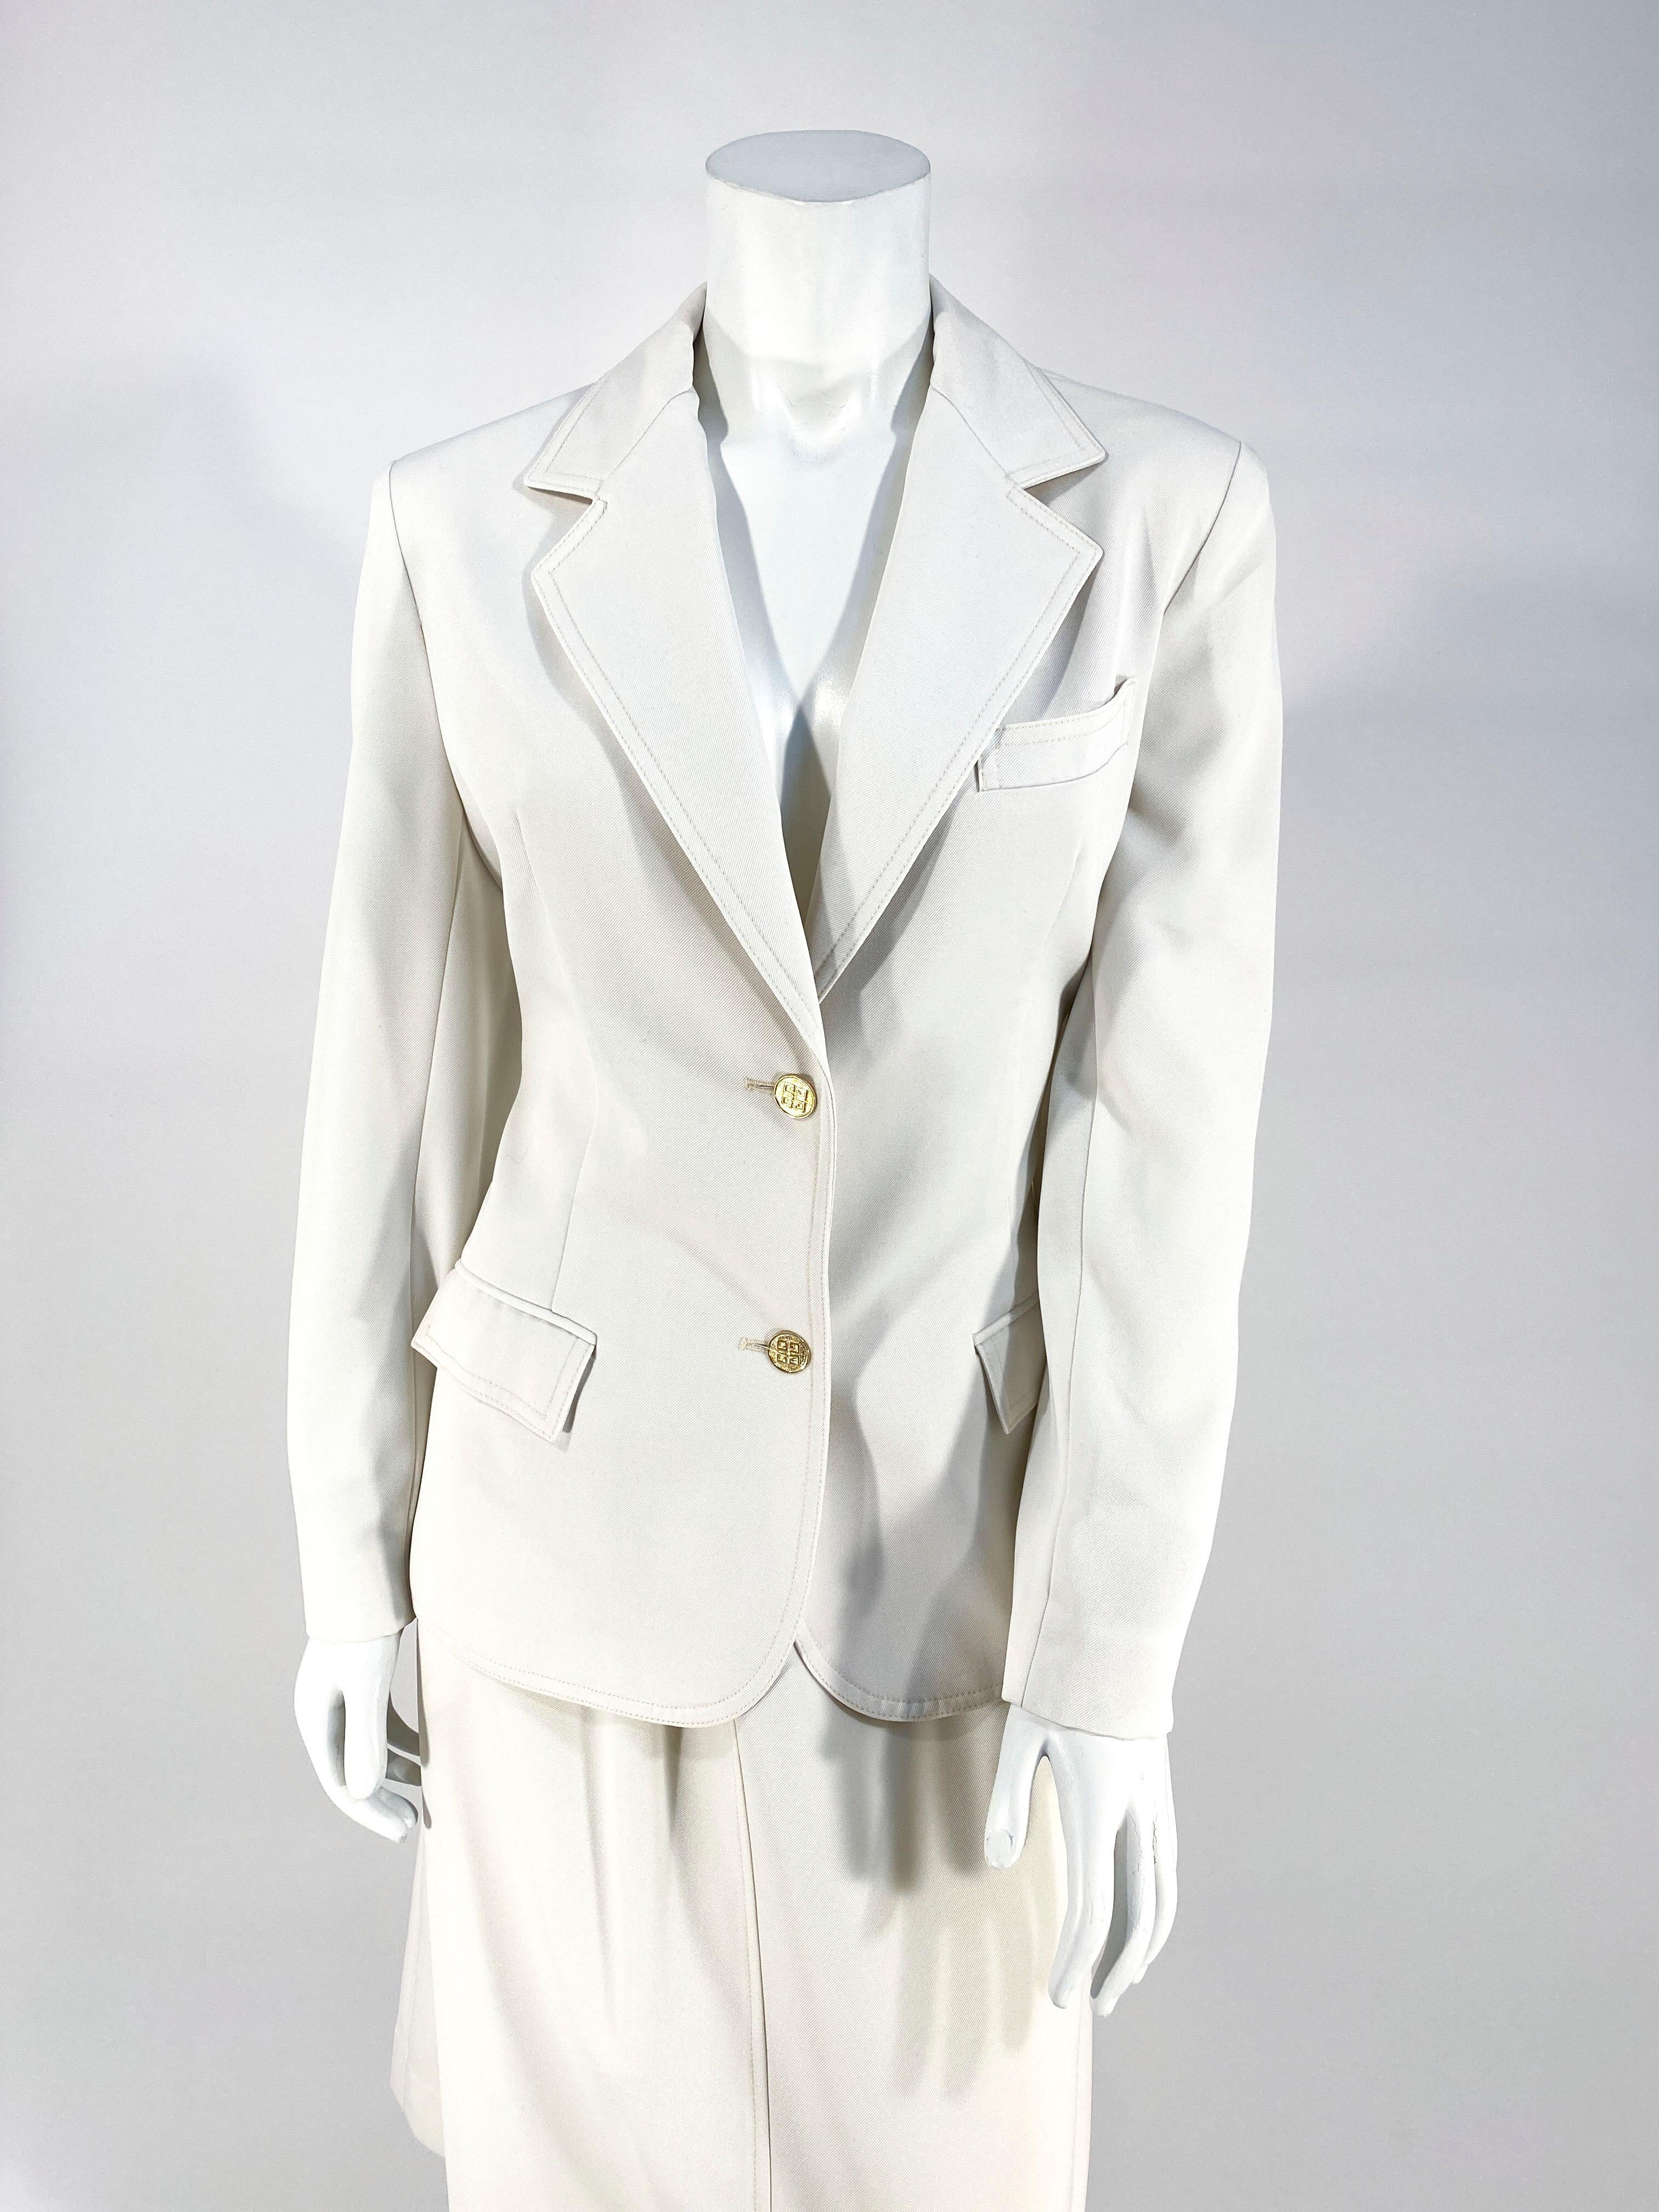 1970s Givenchy cream-colored polyester sports suit with brass buttons with the Givenchy Logo.